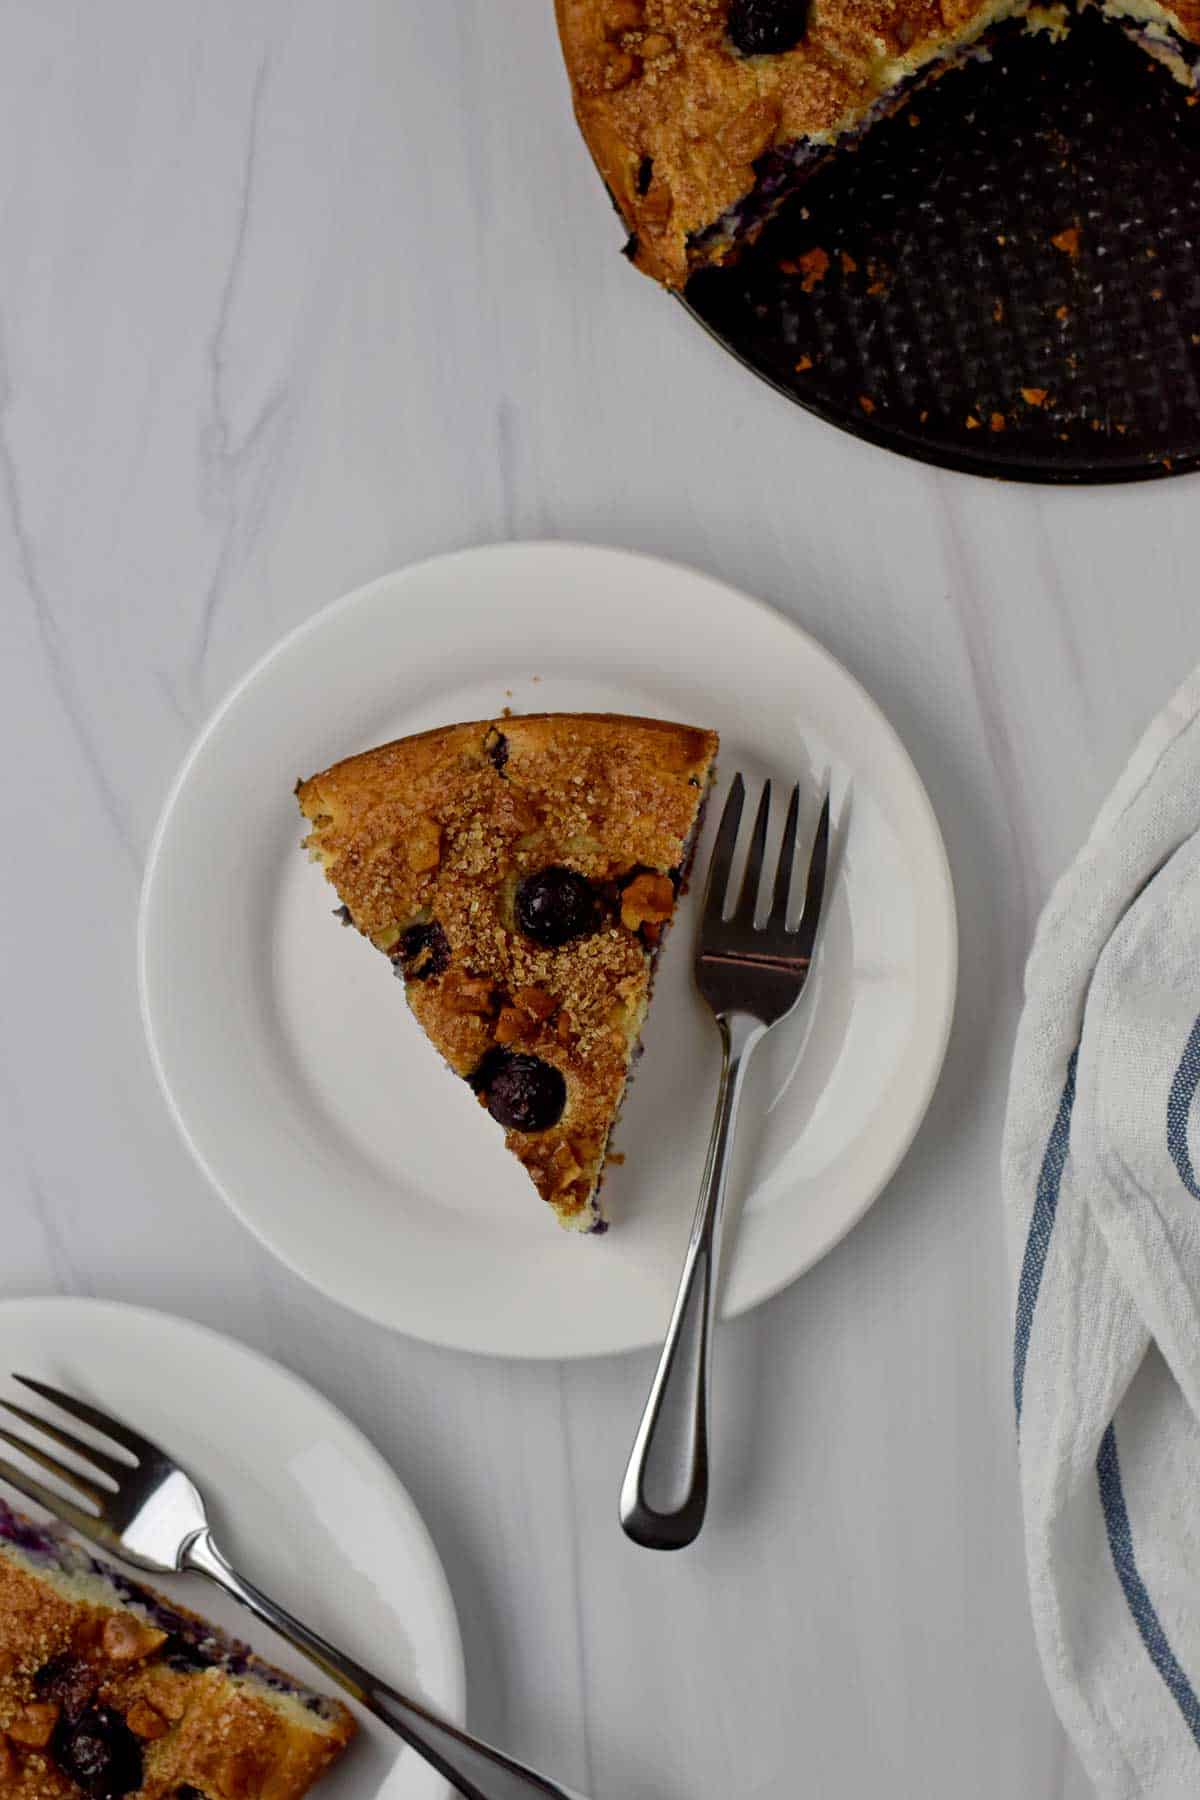 Overhead view of a slice of gluten free blueberry cake and a fork on a white dessert plate.